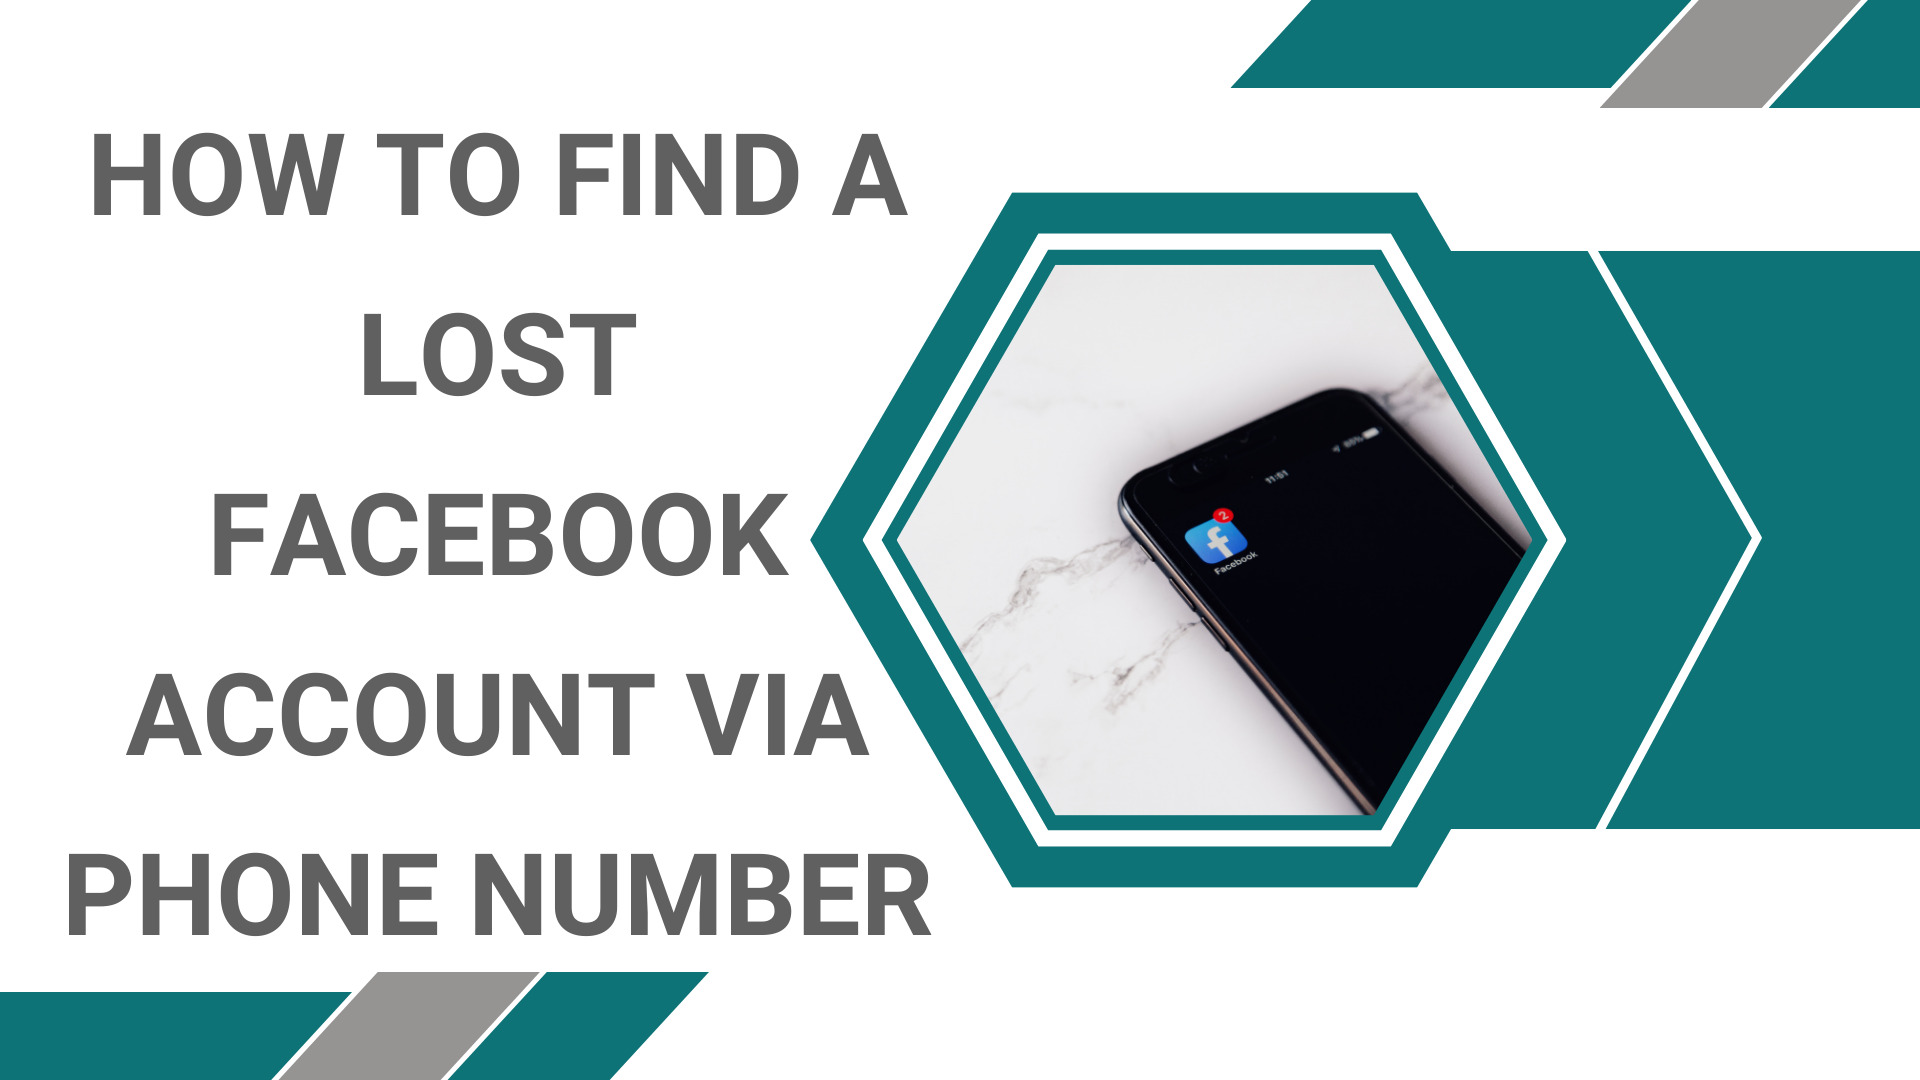 How to find a lost Facebook account by phone number